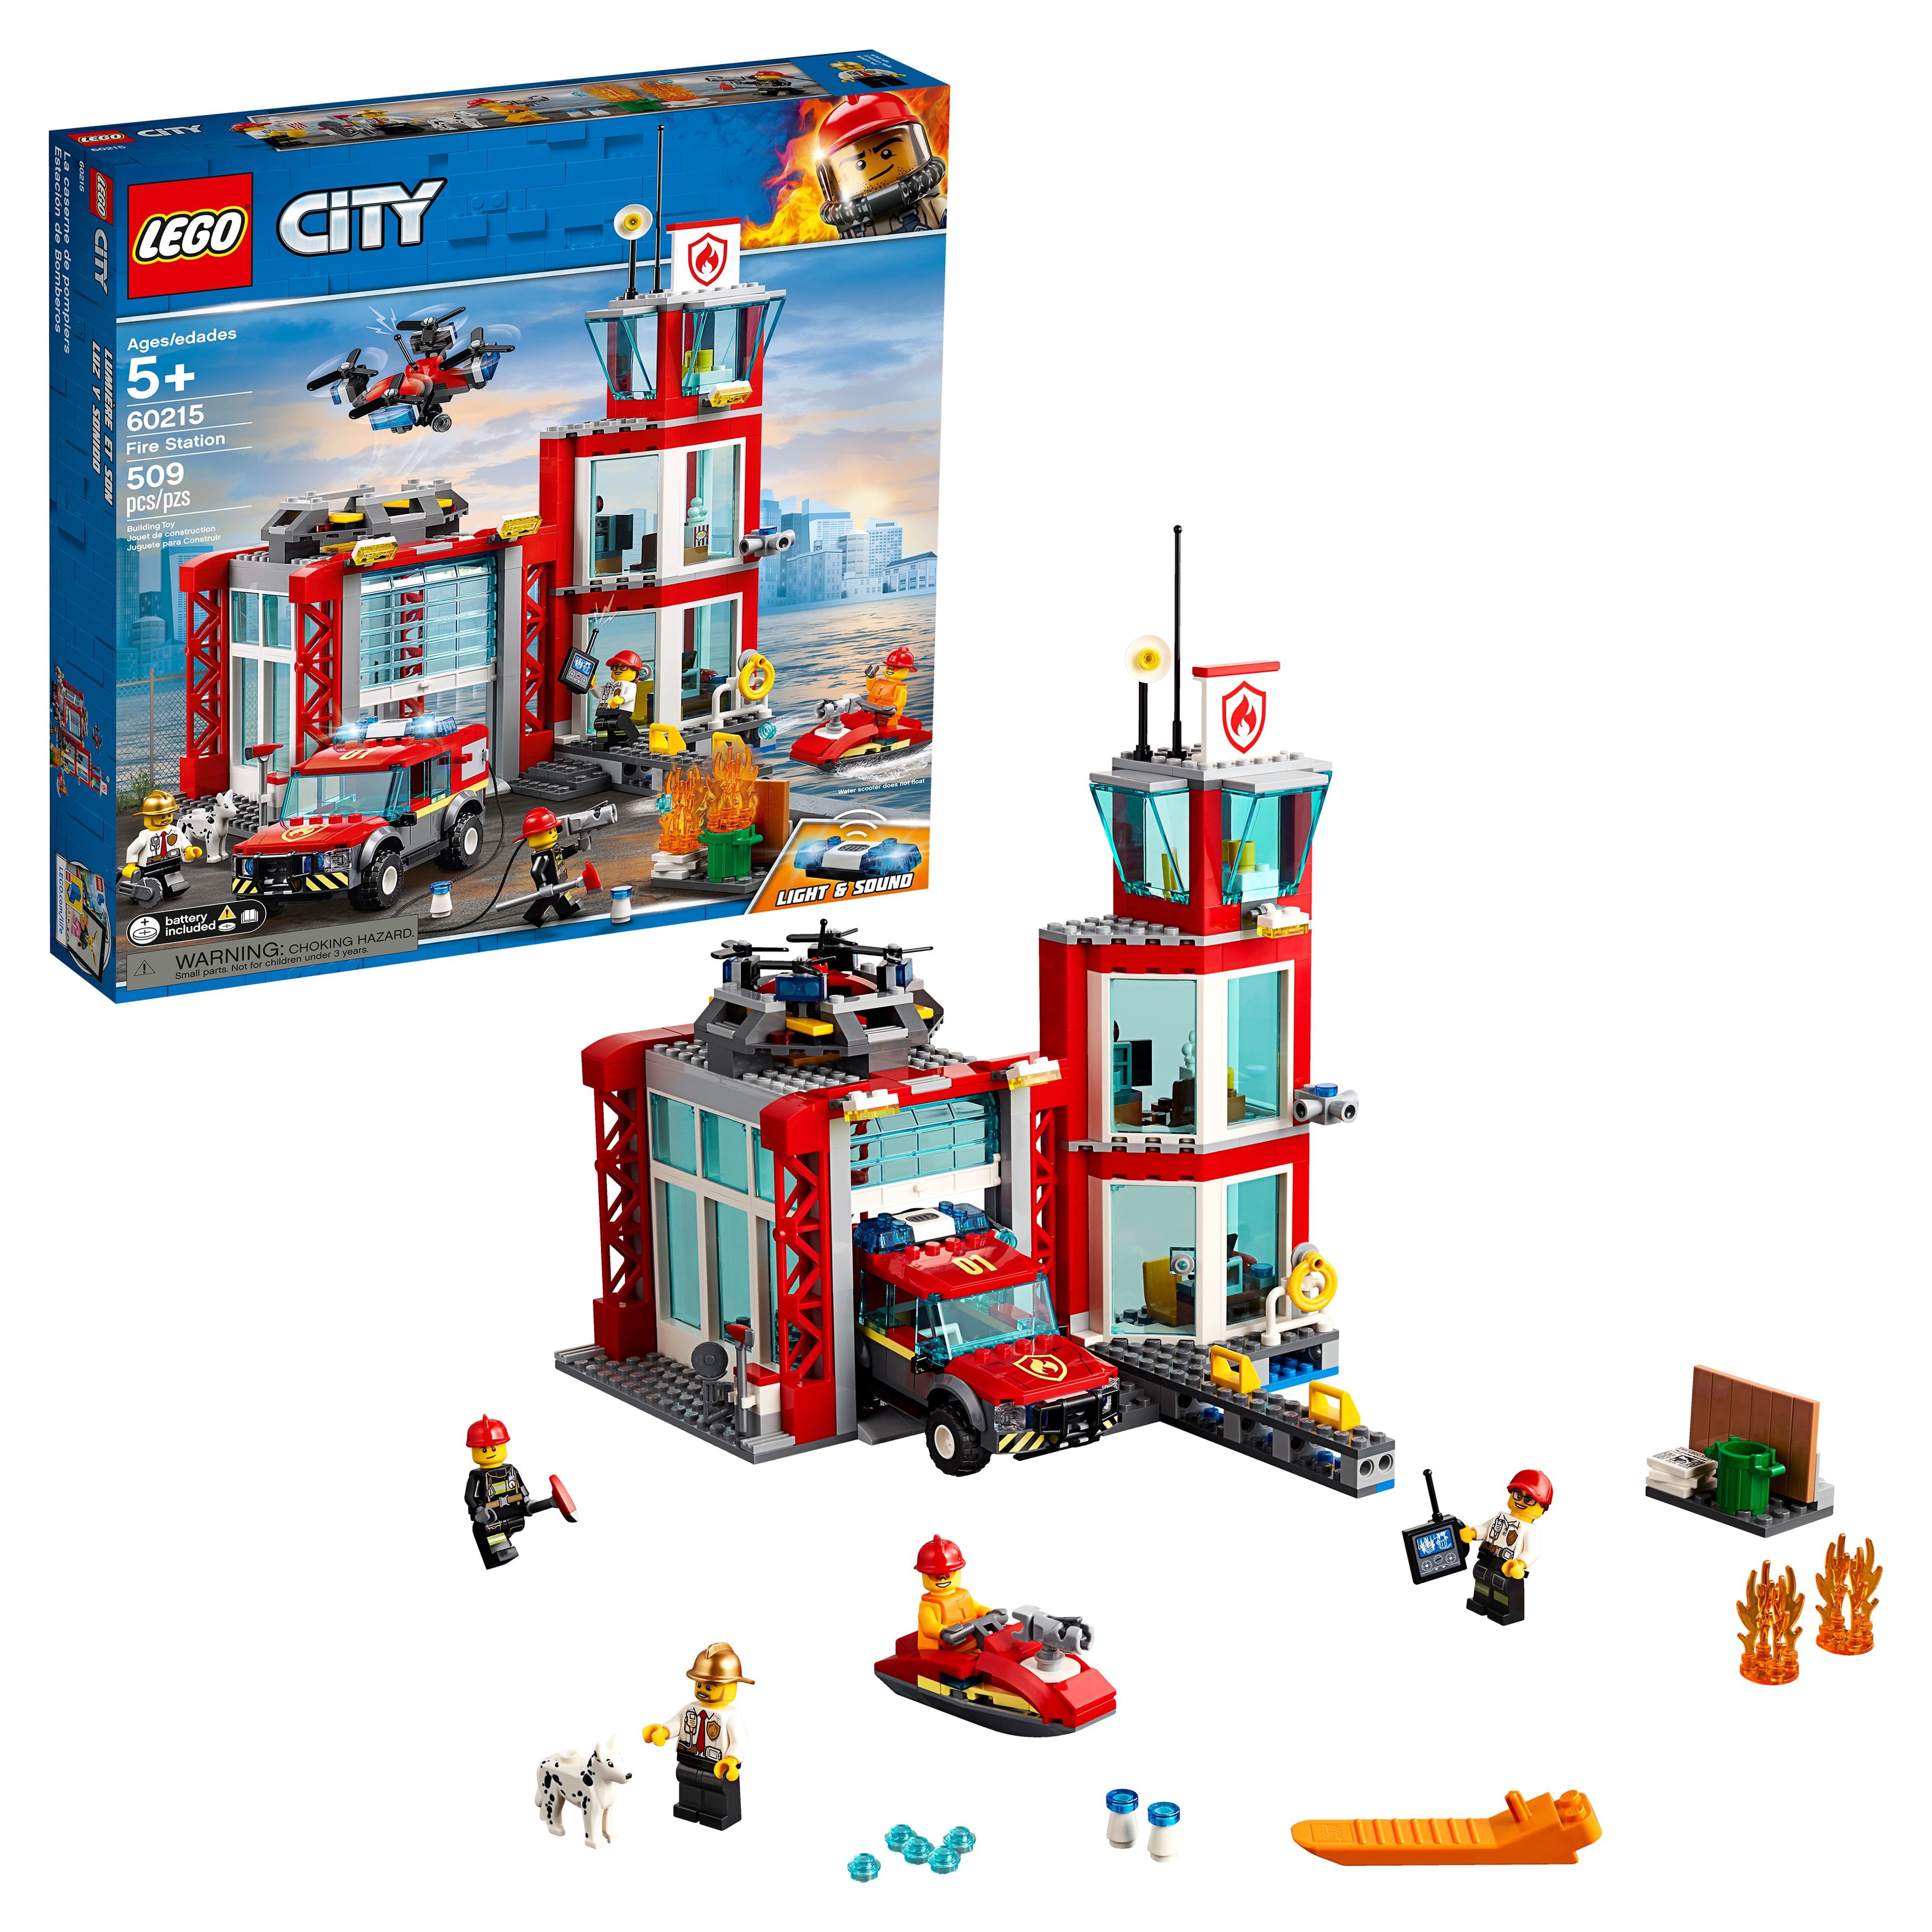 LEGO City Fire Fire Station 60215 Building Set (509 Pieces) - image 1 of 8